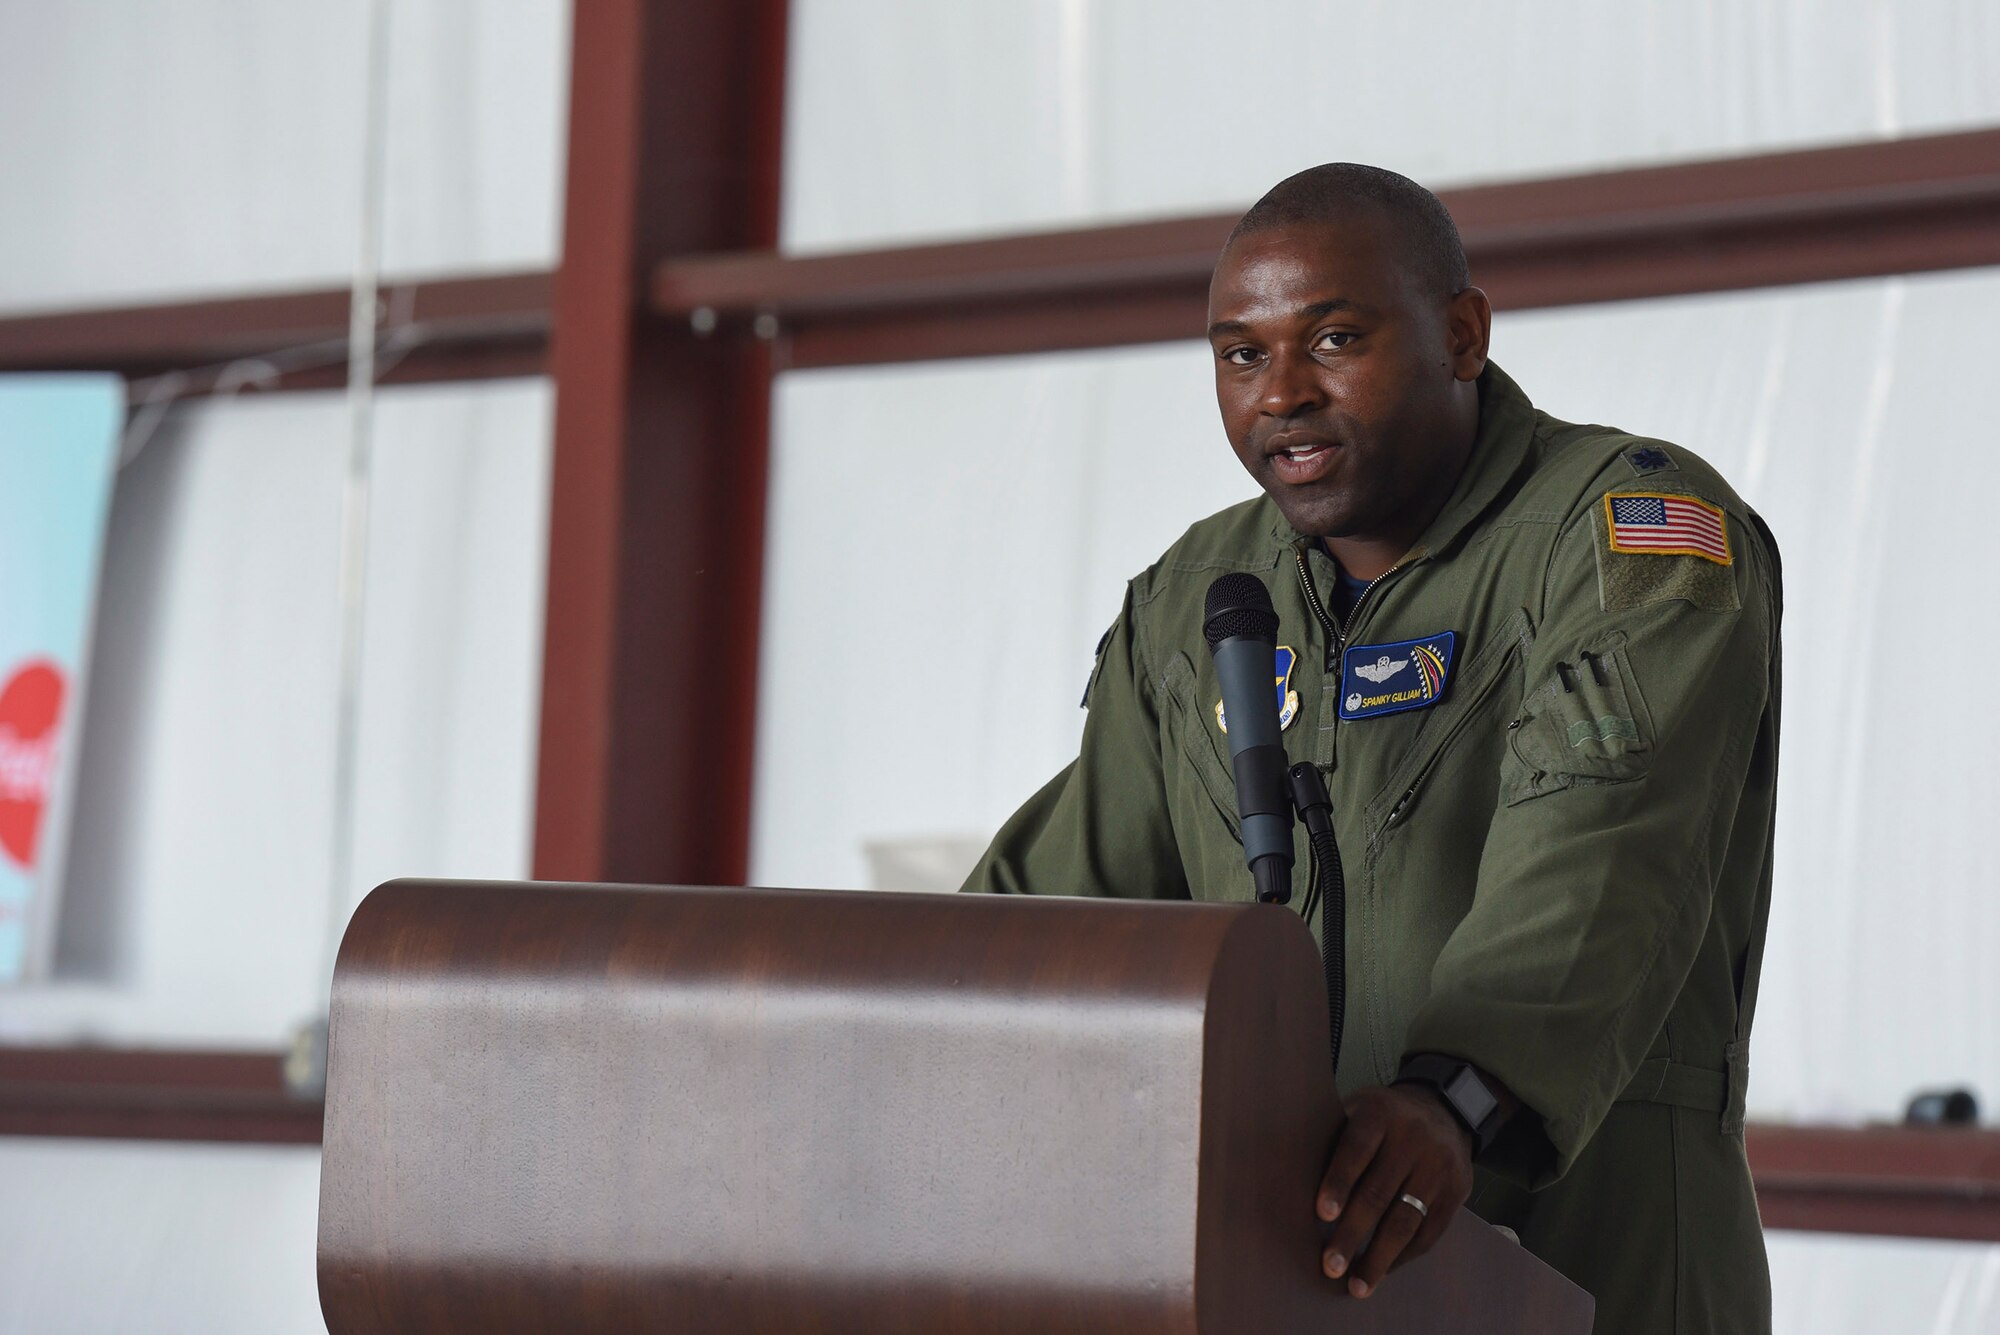 Lt. Col. Charles Gilliam, 48th Flying Training Squadron commander, Columbus Air Force Base, Miss., commends attendees for learning basic flying principles during the Eyes Above the Horizon diversity outreach program, July 22, 2017, in Valdosta, Ga. The Valdosta Regional Airport welcomed approximately 100 10-19-year-olds as they took the Valdosta skies to commemorate the 76th Anniversary of the historic Tuskegee Airmen. The program focuses on mentoring and familiarizing underrepresented minorities with basic flying fundamentals. (U.S. Air Force photo by Senior Airman Greg Nash) 